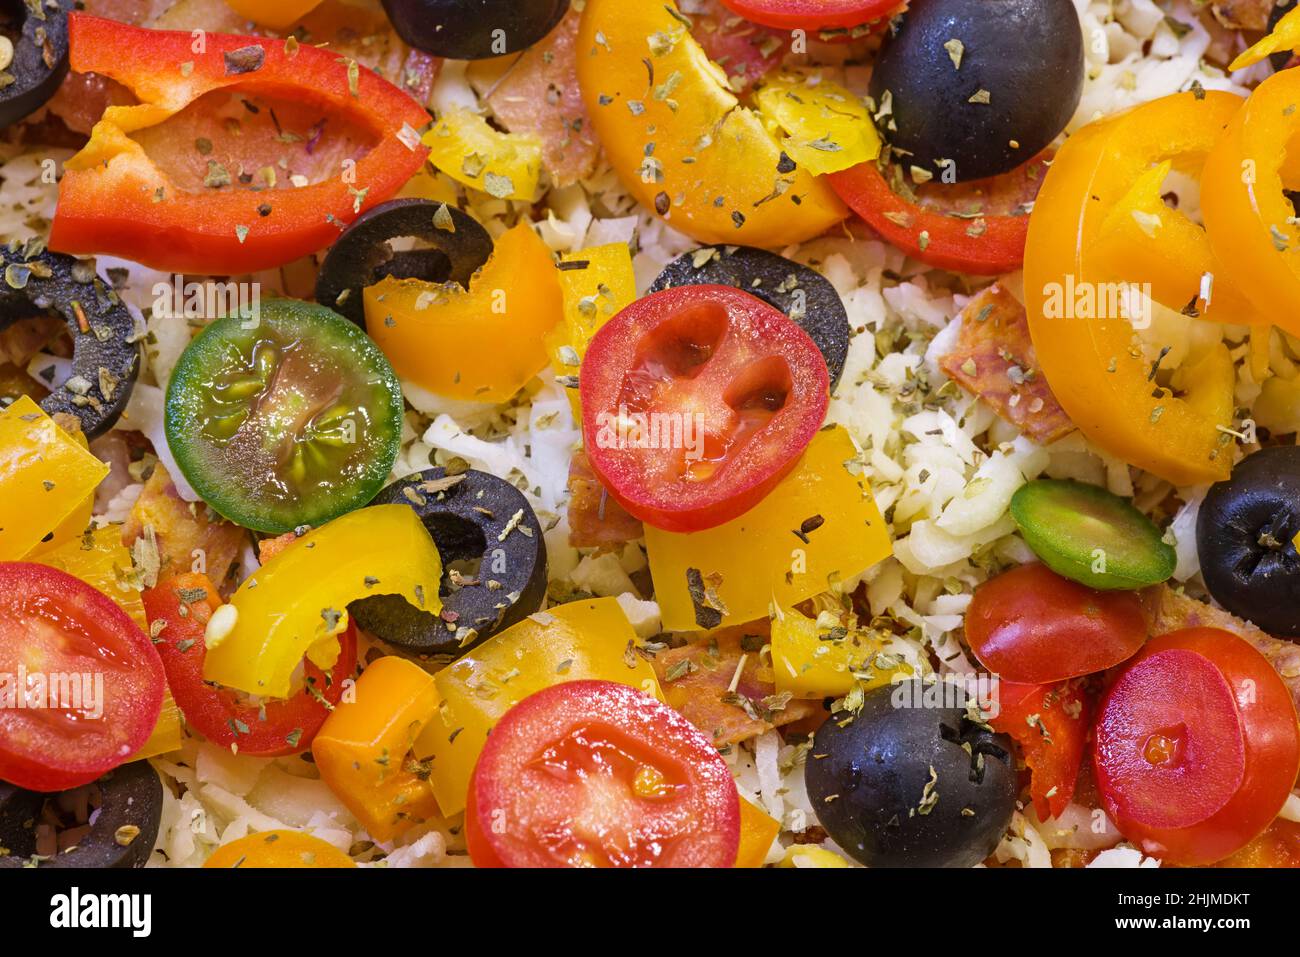 detail of an unbaked homemade pizza top with peppers tomato olives cheese and herbs ready to bake Stock Photo